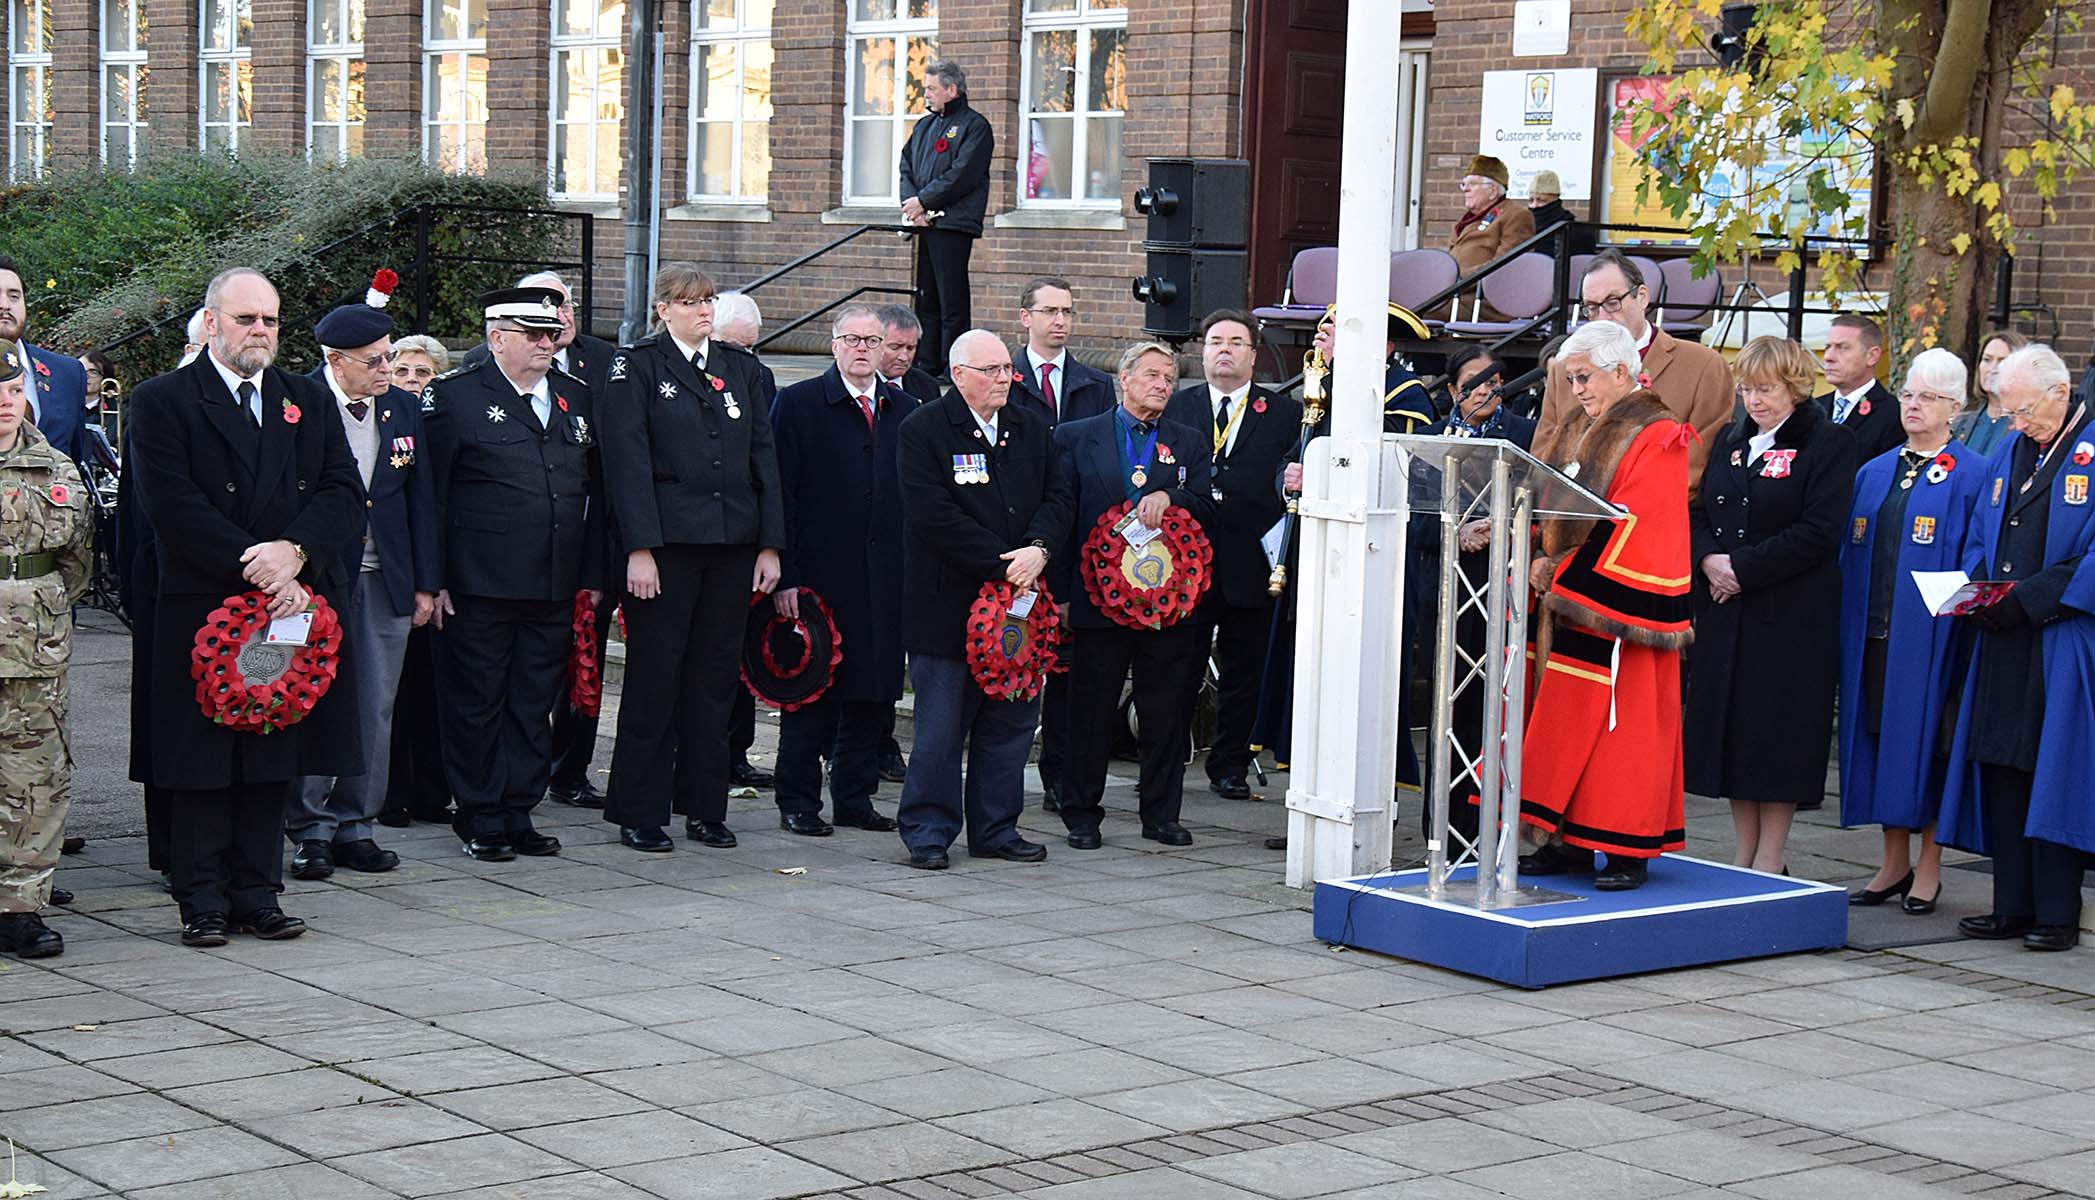 Mayor and Chairman to lead Remembrance Sunday service 2017